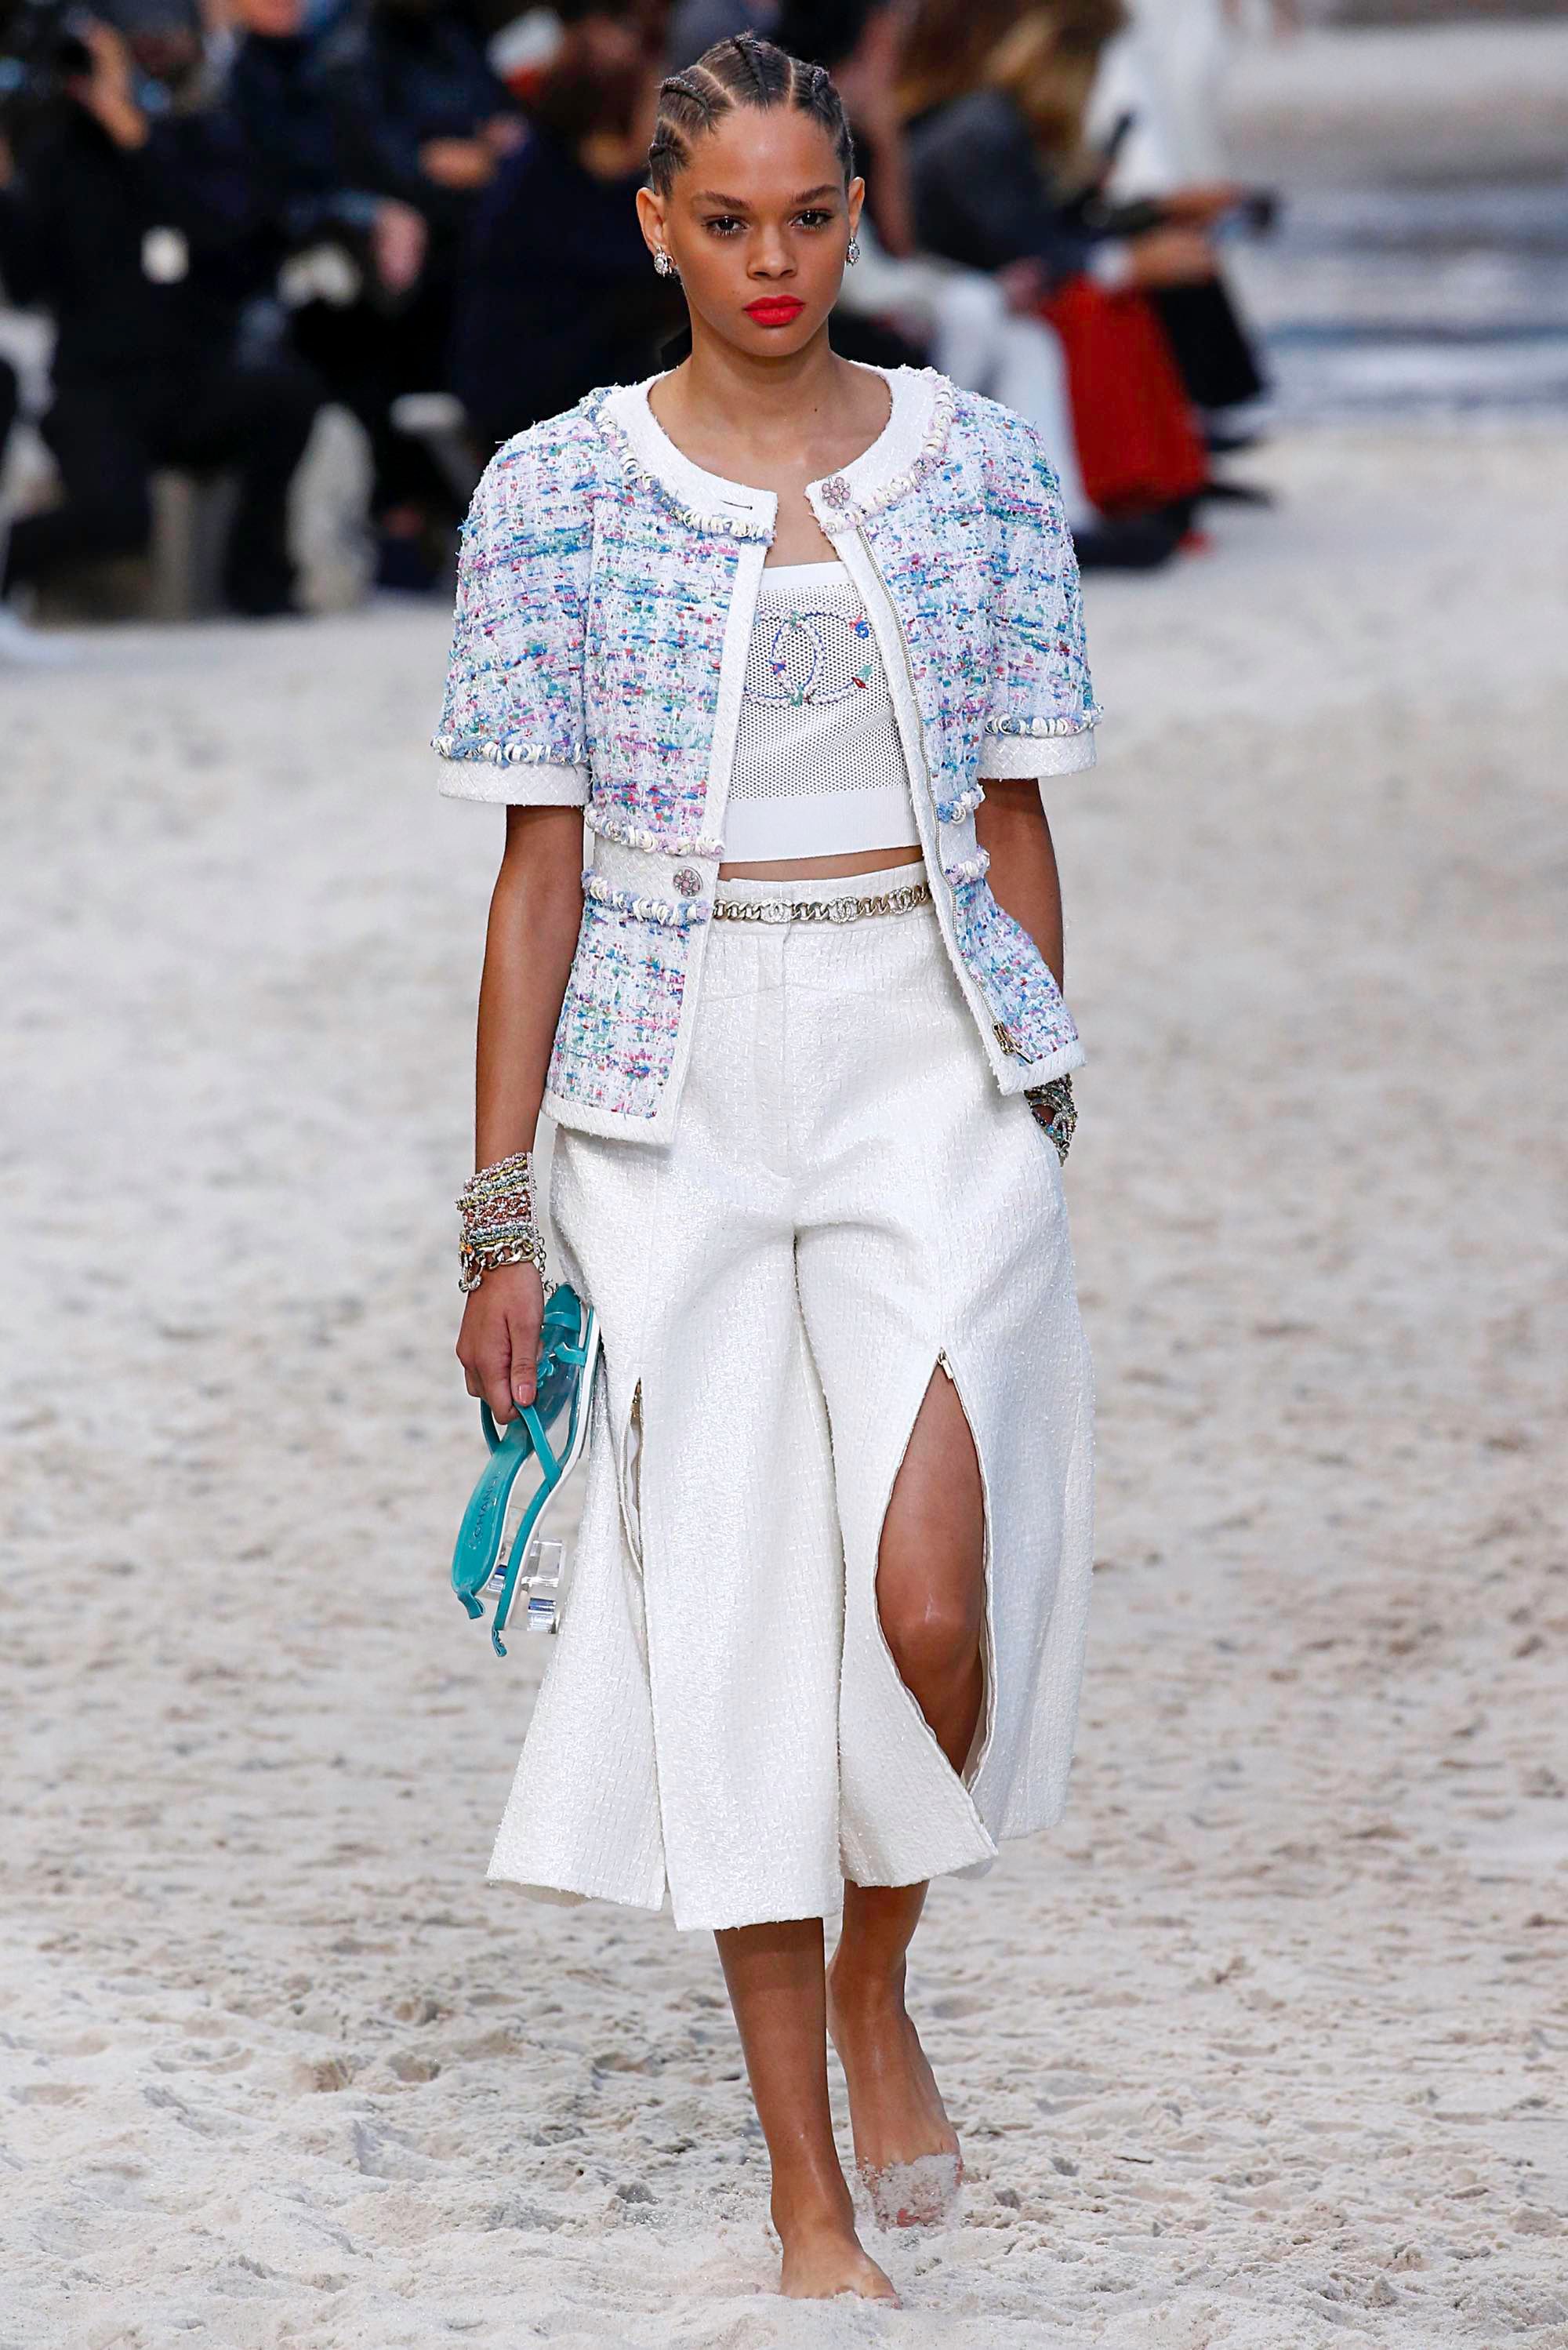 Summer preview Chanel makeup SS19 show Lucia Pica Paris Fashion Week